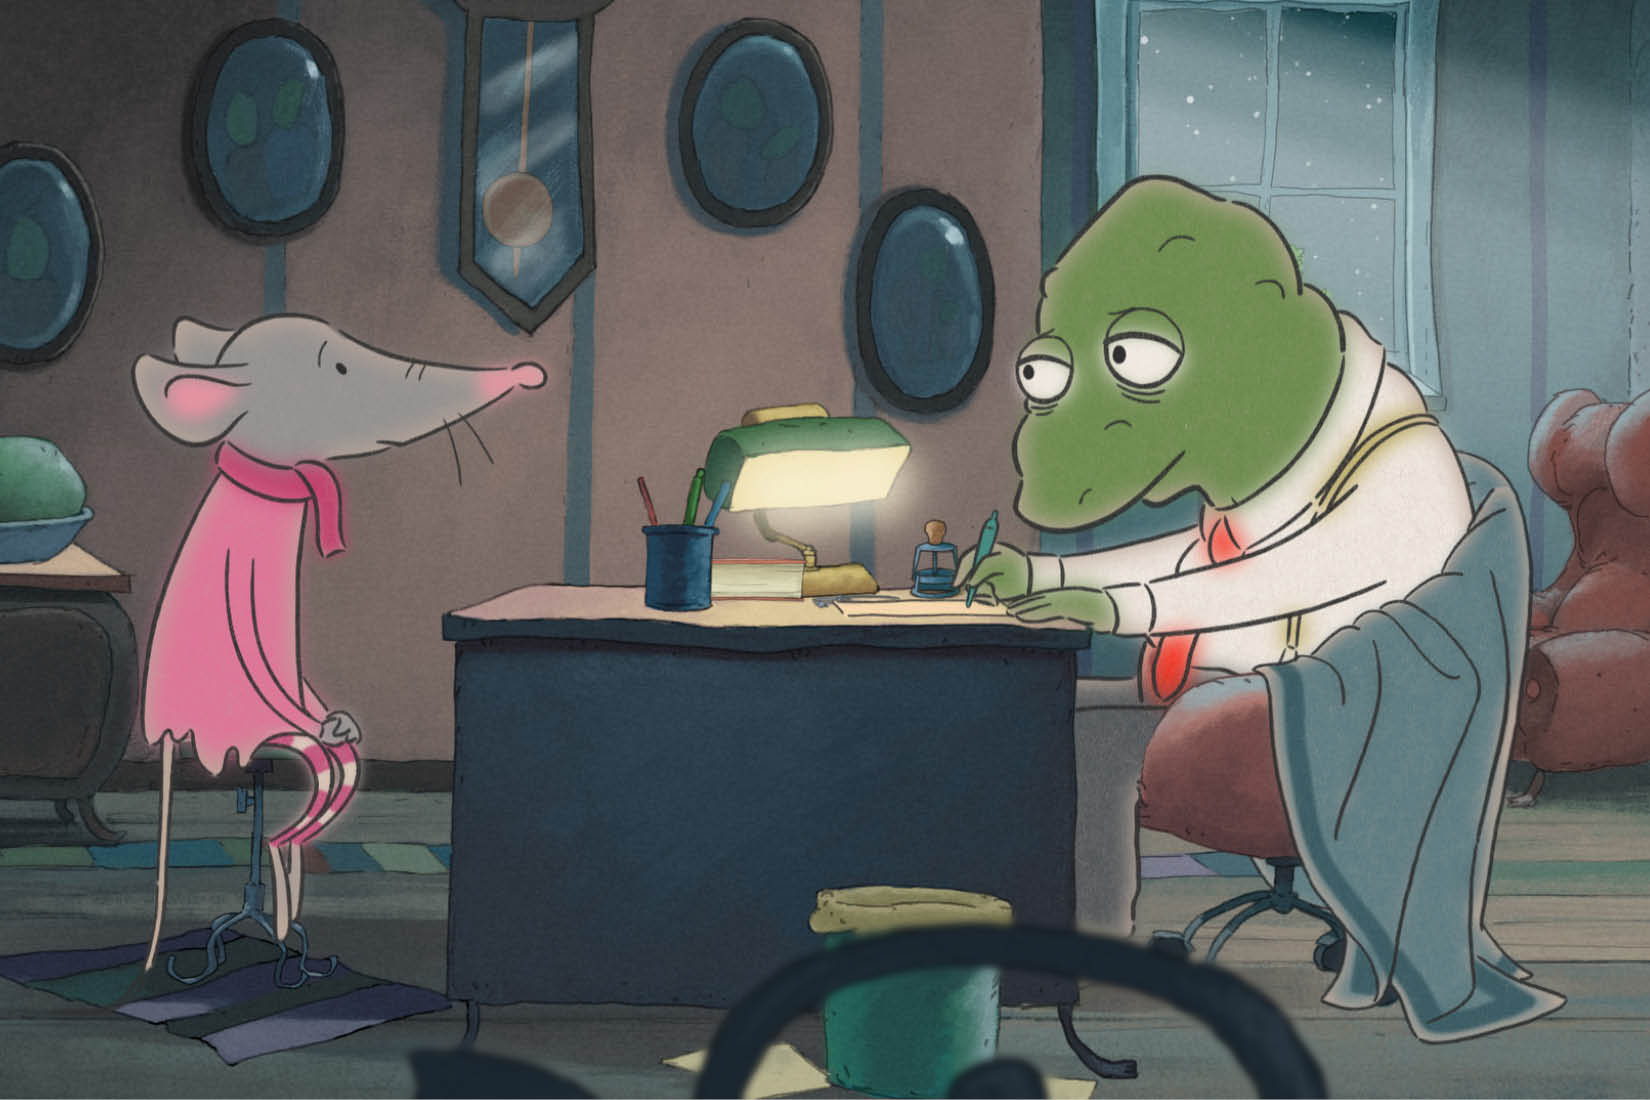 Paddy the little mouse and inspector Gordon are talking over his desk and he's taking notes for his investigation.